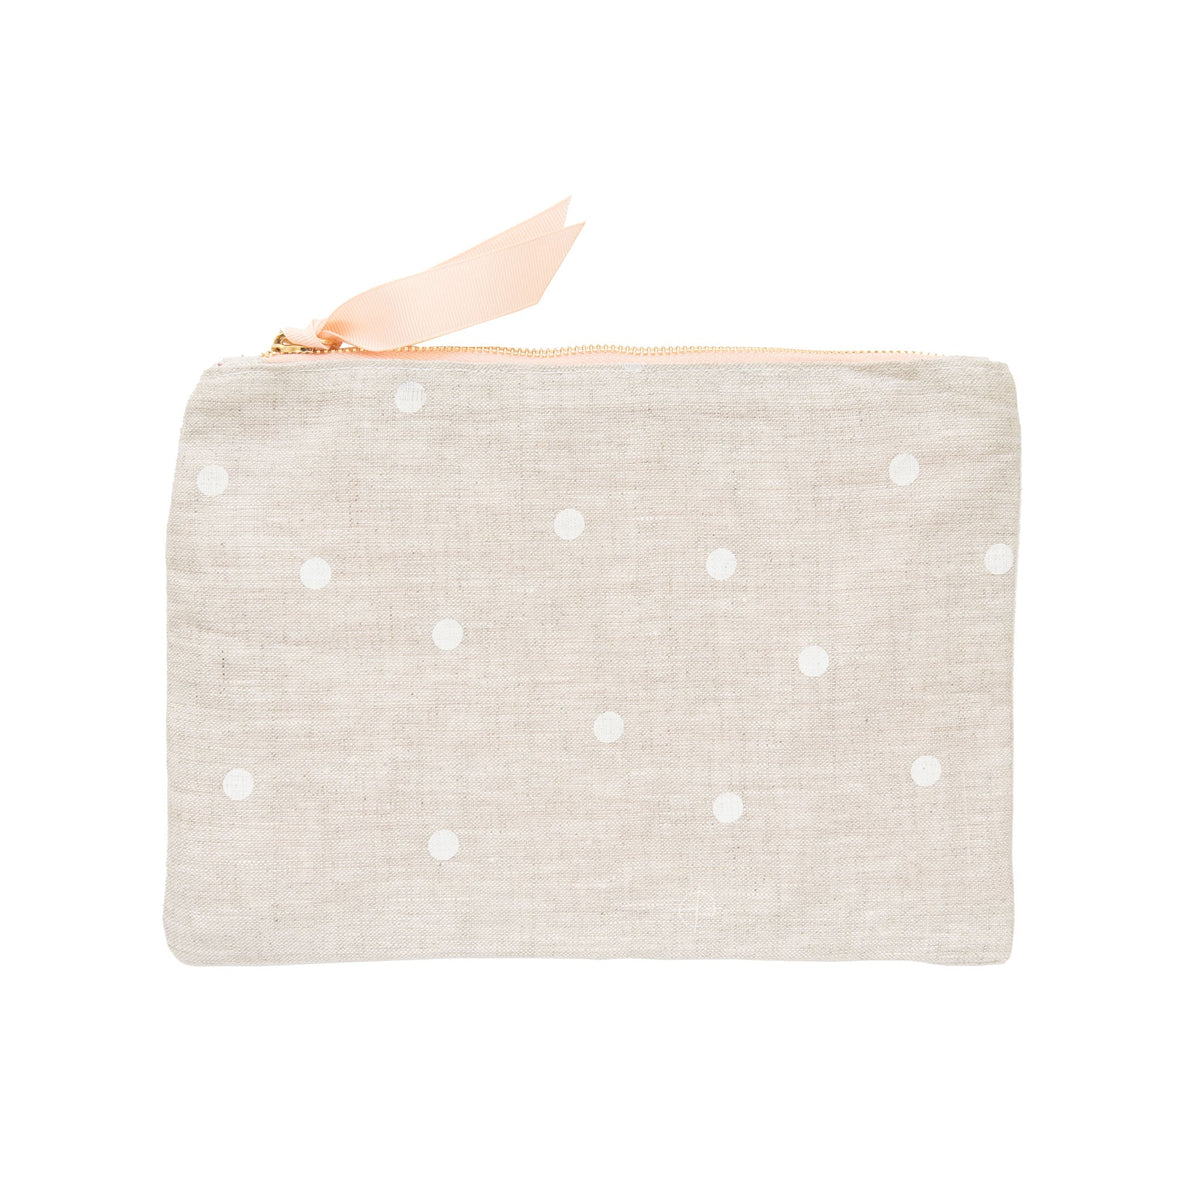 Flax and white dot fabric pouch with pink ribbon pull